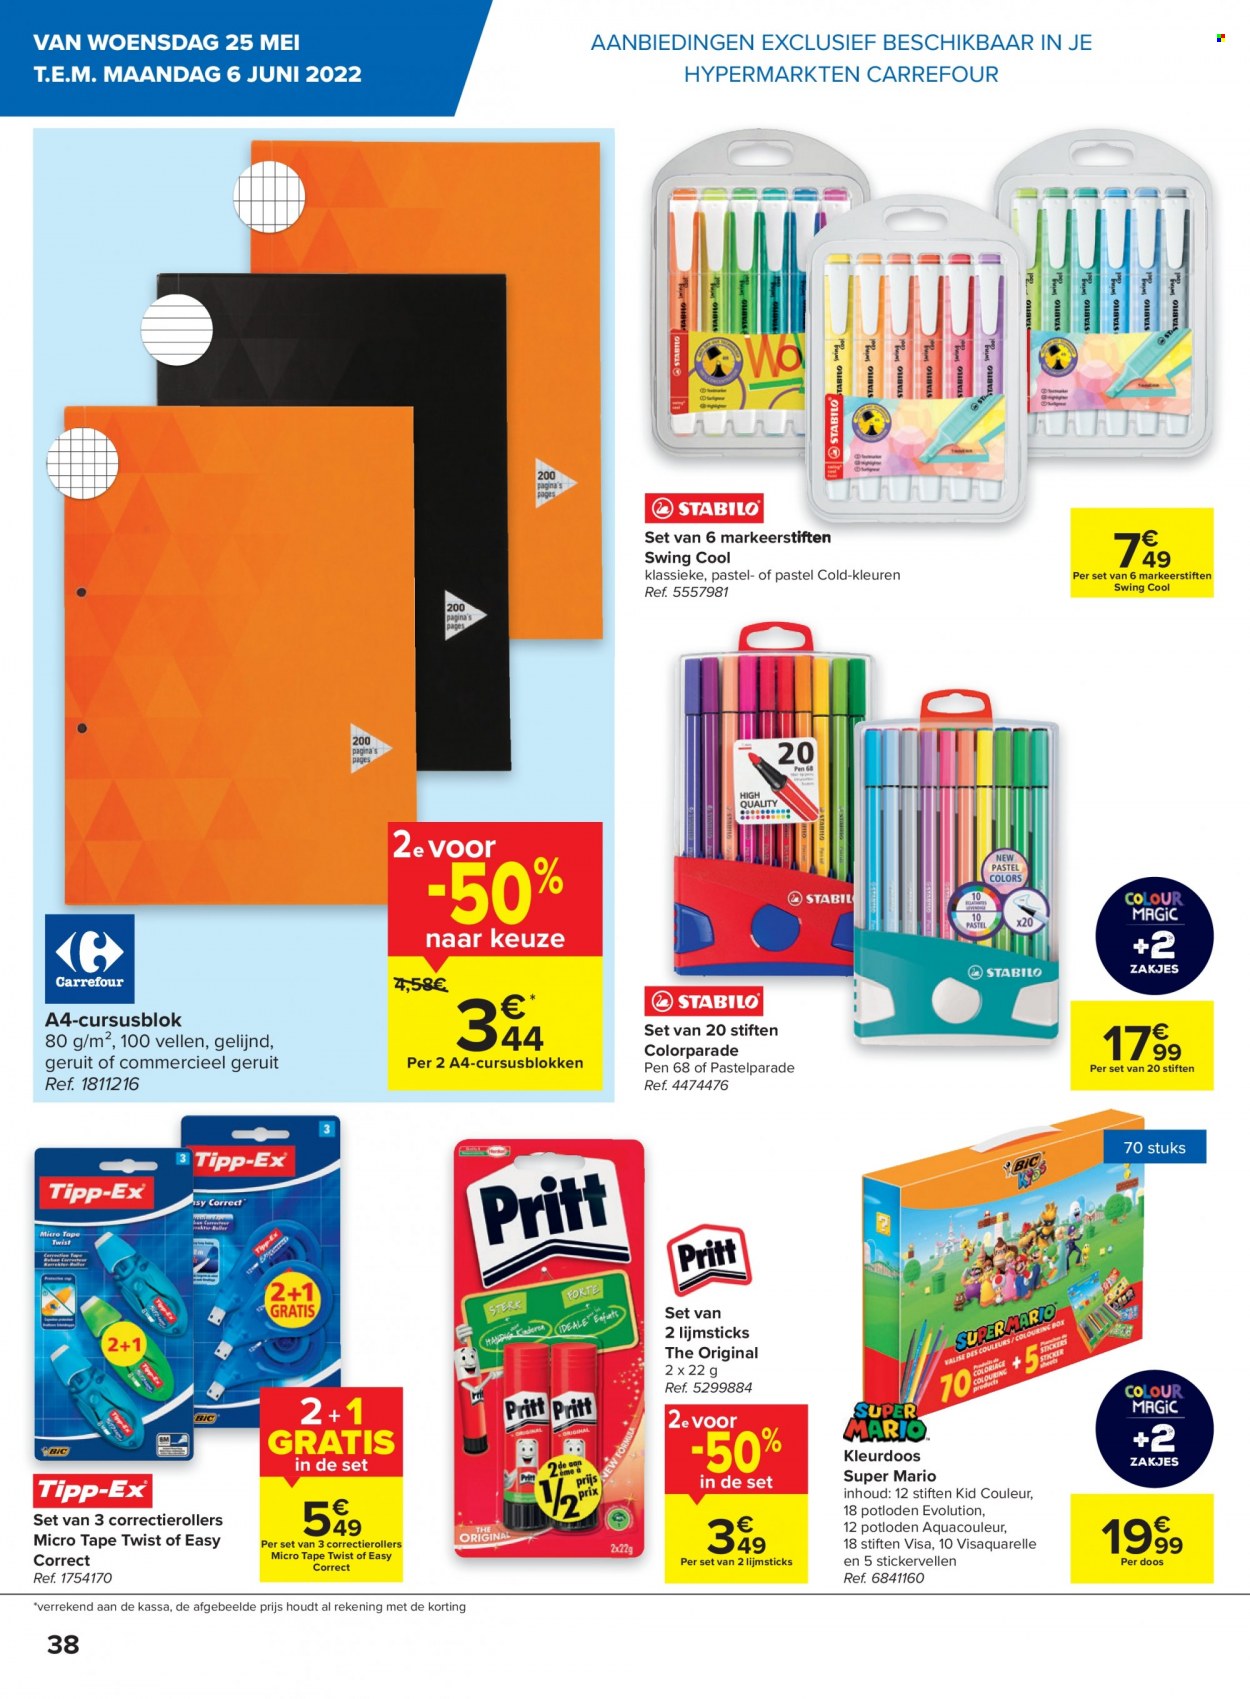 Catalogue Carrefour hypermarkt - 24.5.2022 - 30.5.2022. Page 38.